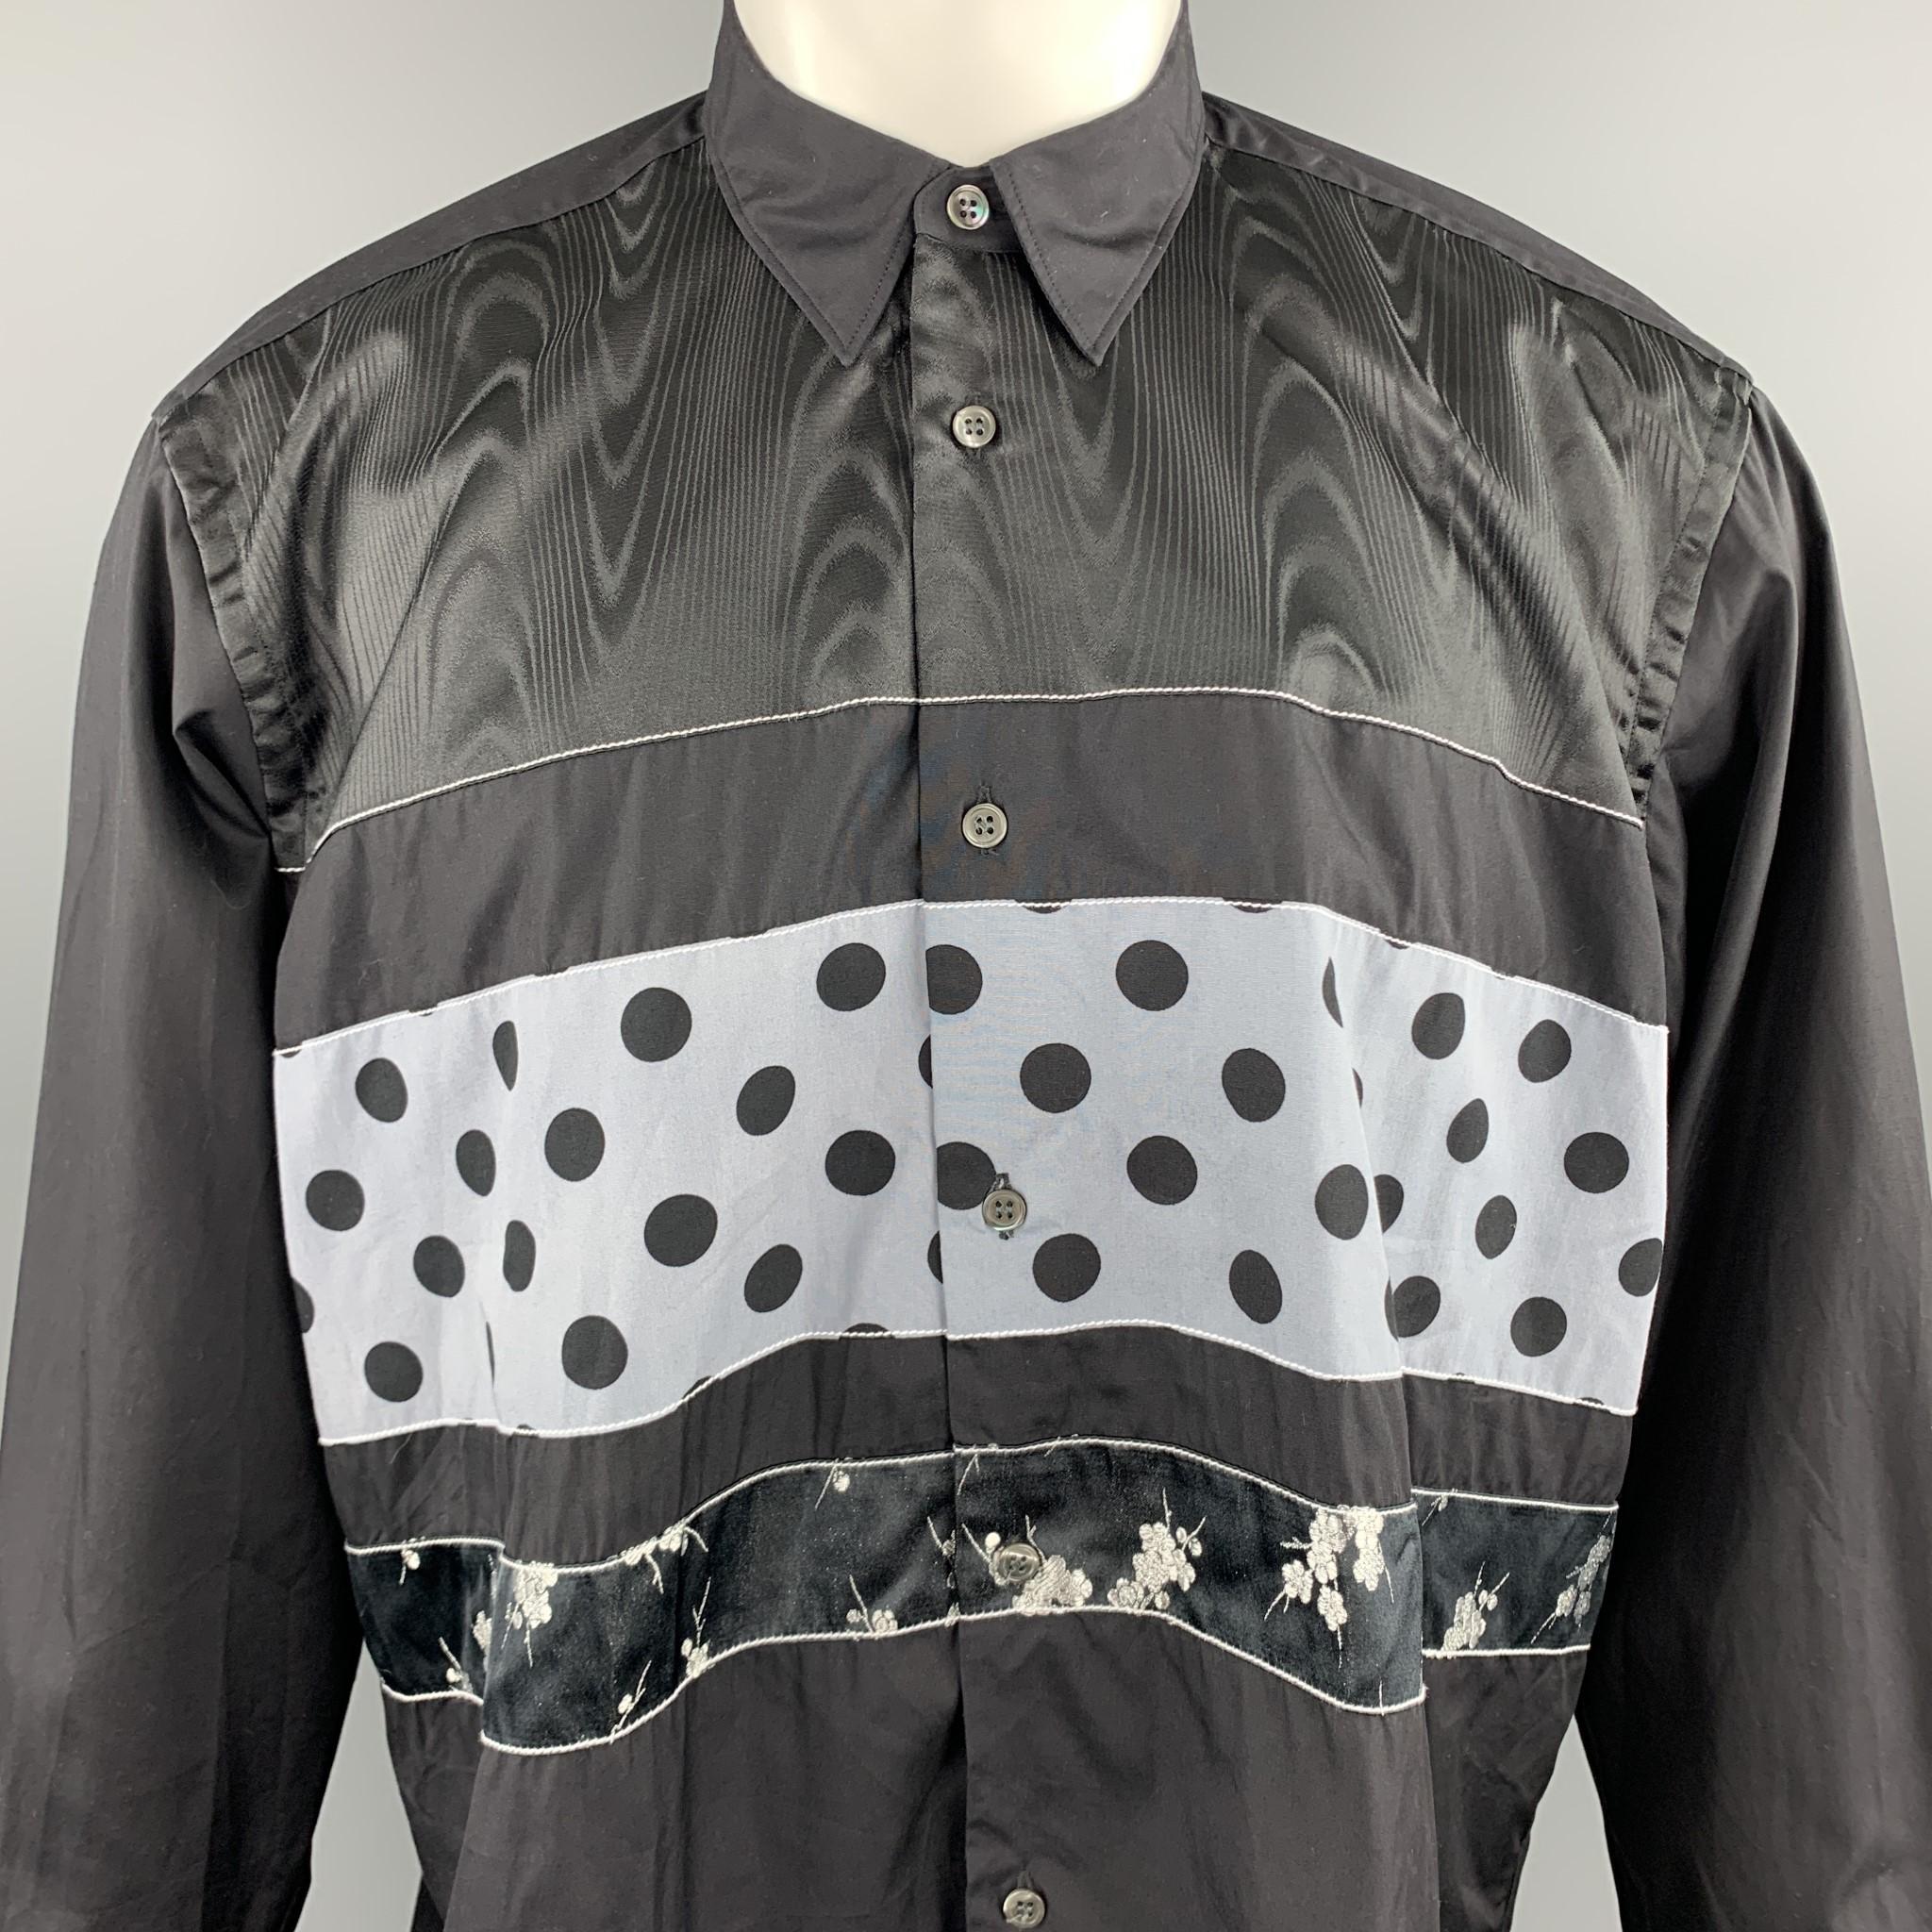 COMME des GARCONS SHIRT dress shirt comes in black cotton with a pointed collar, black moire satin top panel, grey polka dot mid stripe panel, and metallic floral stripe panel.  Made in France.

Excellent Pre-Owned Condition.
Marked: M 